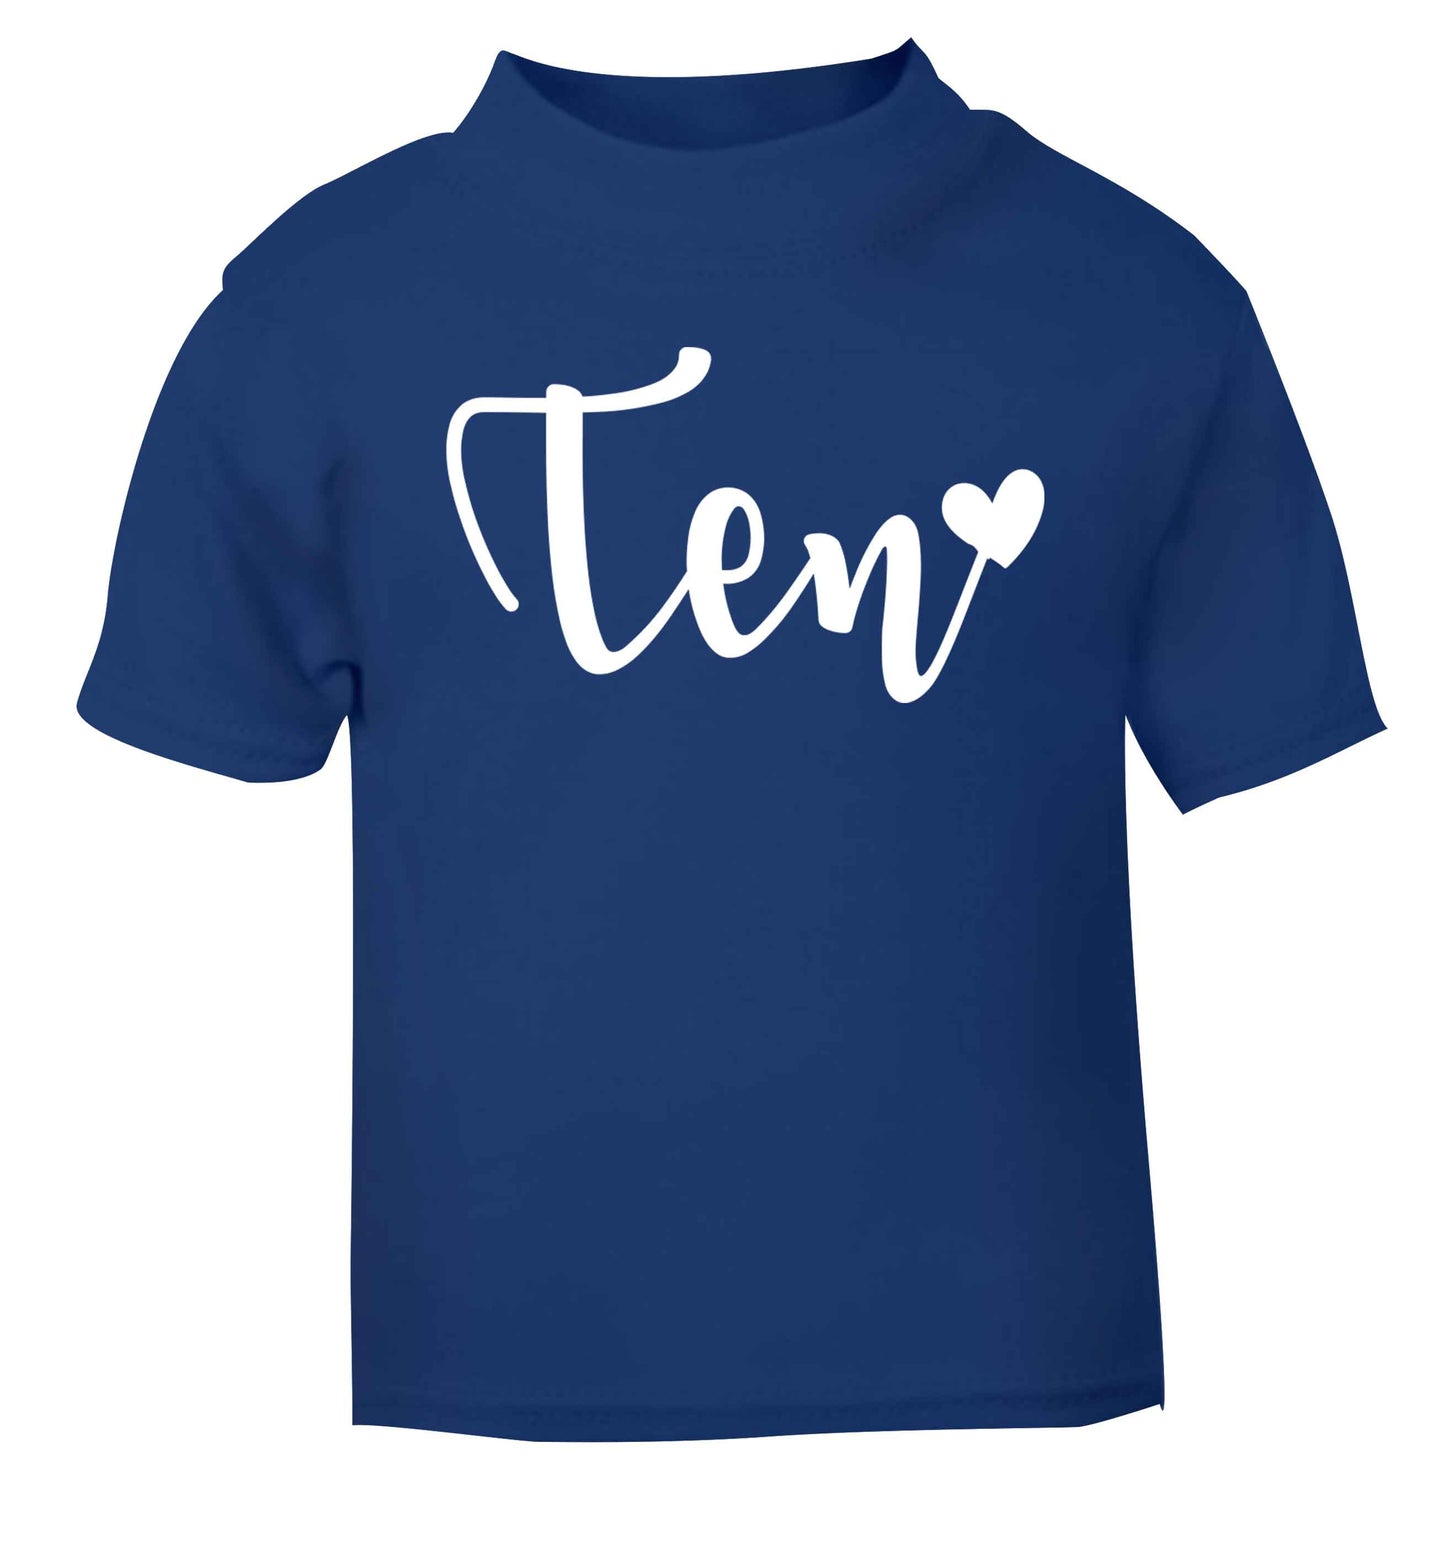 Ten and heart blue baby toddler Tshirt 2 Years